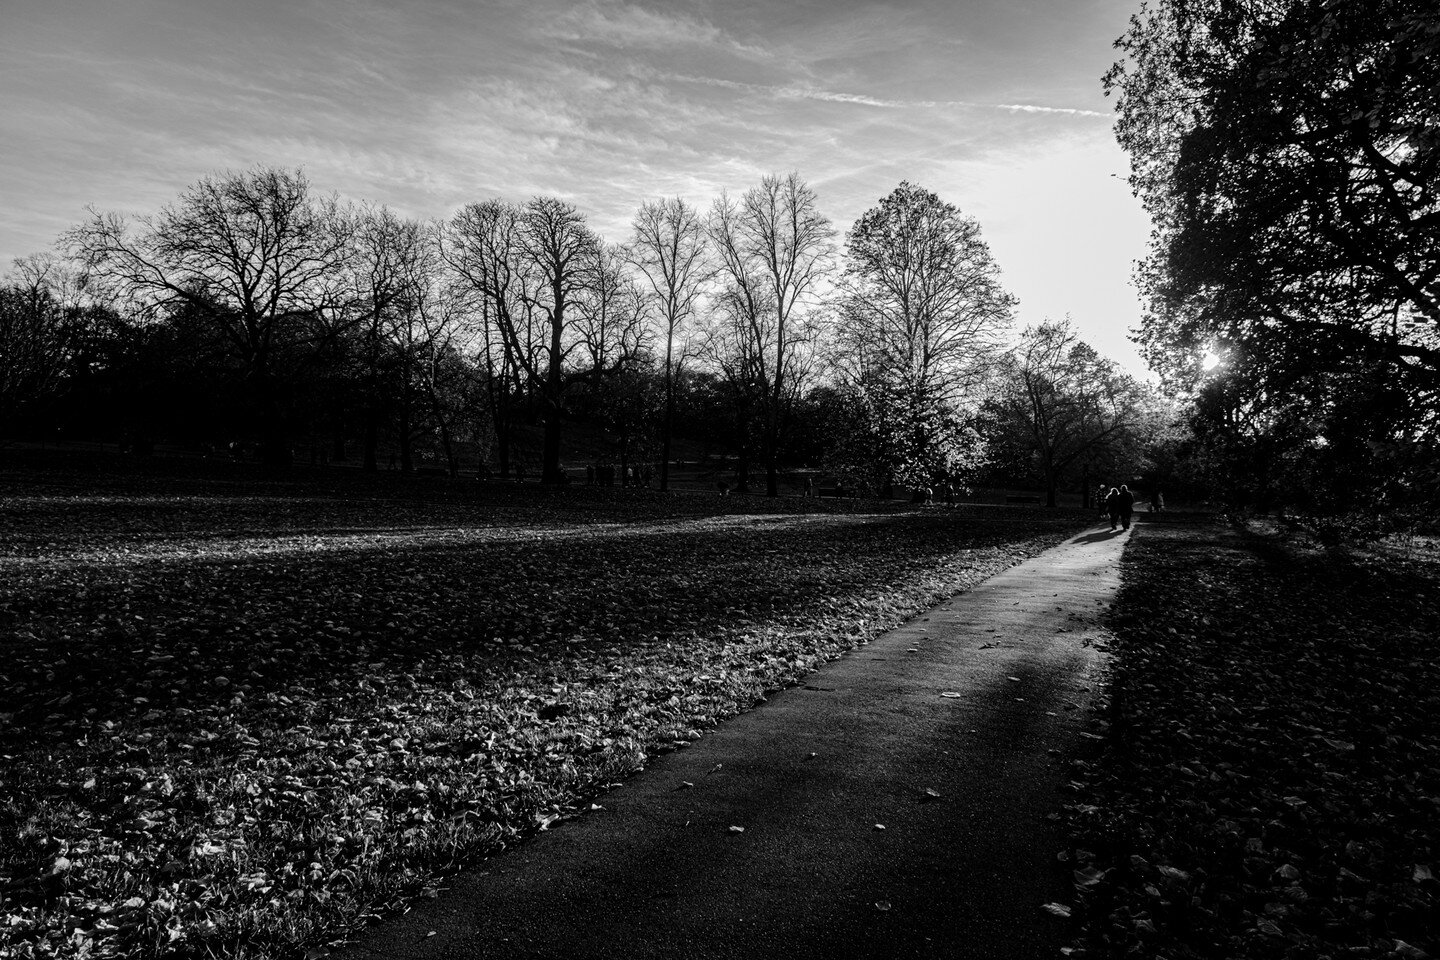 I rather dramatic shot along a path in Greenwich Park in late November.

This was a classic case of &quot;missed by a few minutes&quot;. There was a couple walking away from the foreground, and once I realised the perspective and significance of the 